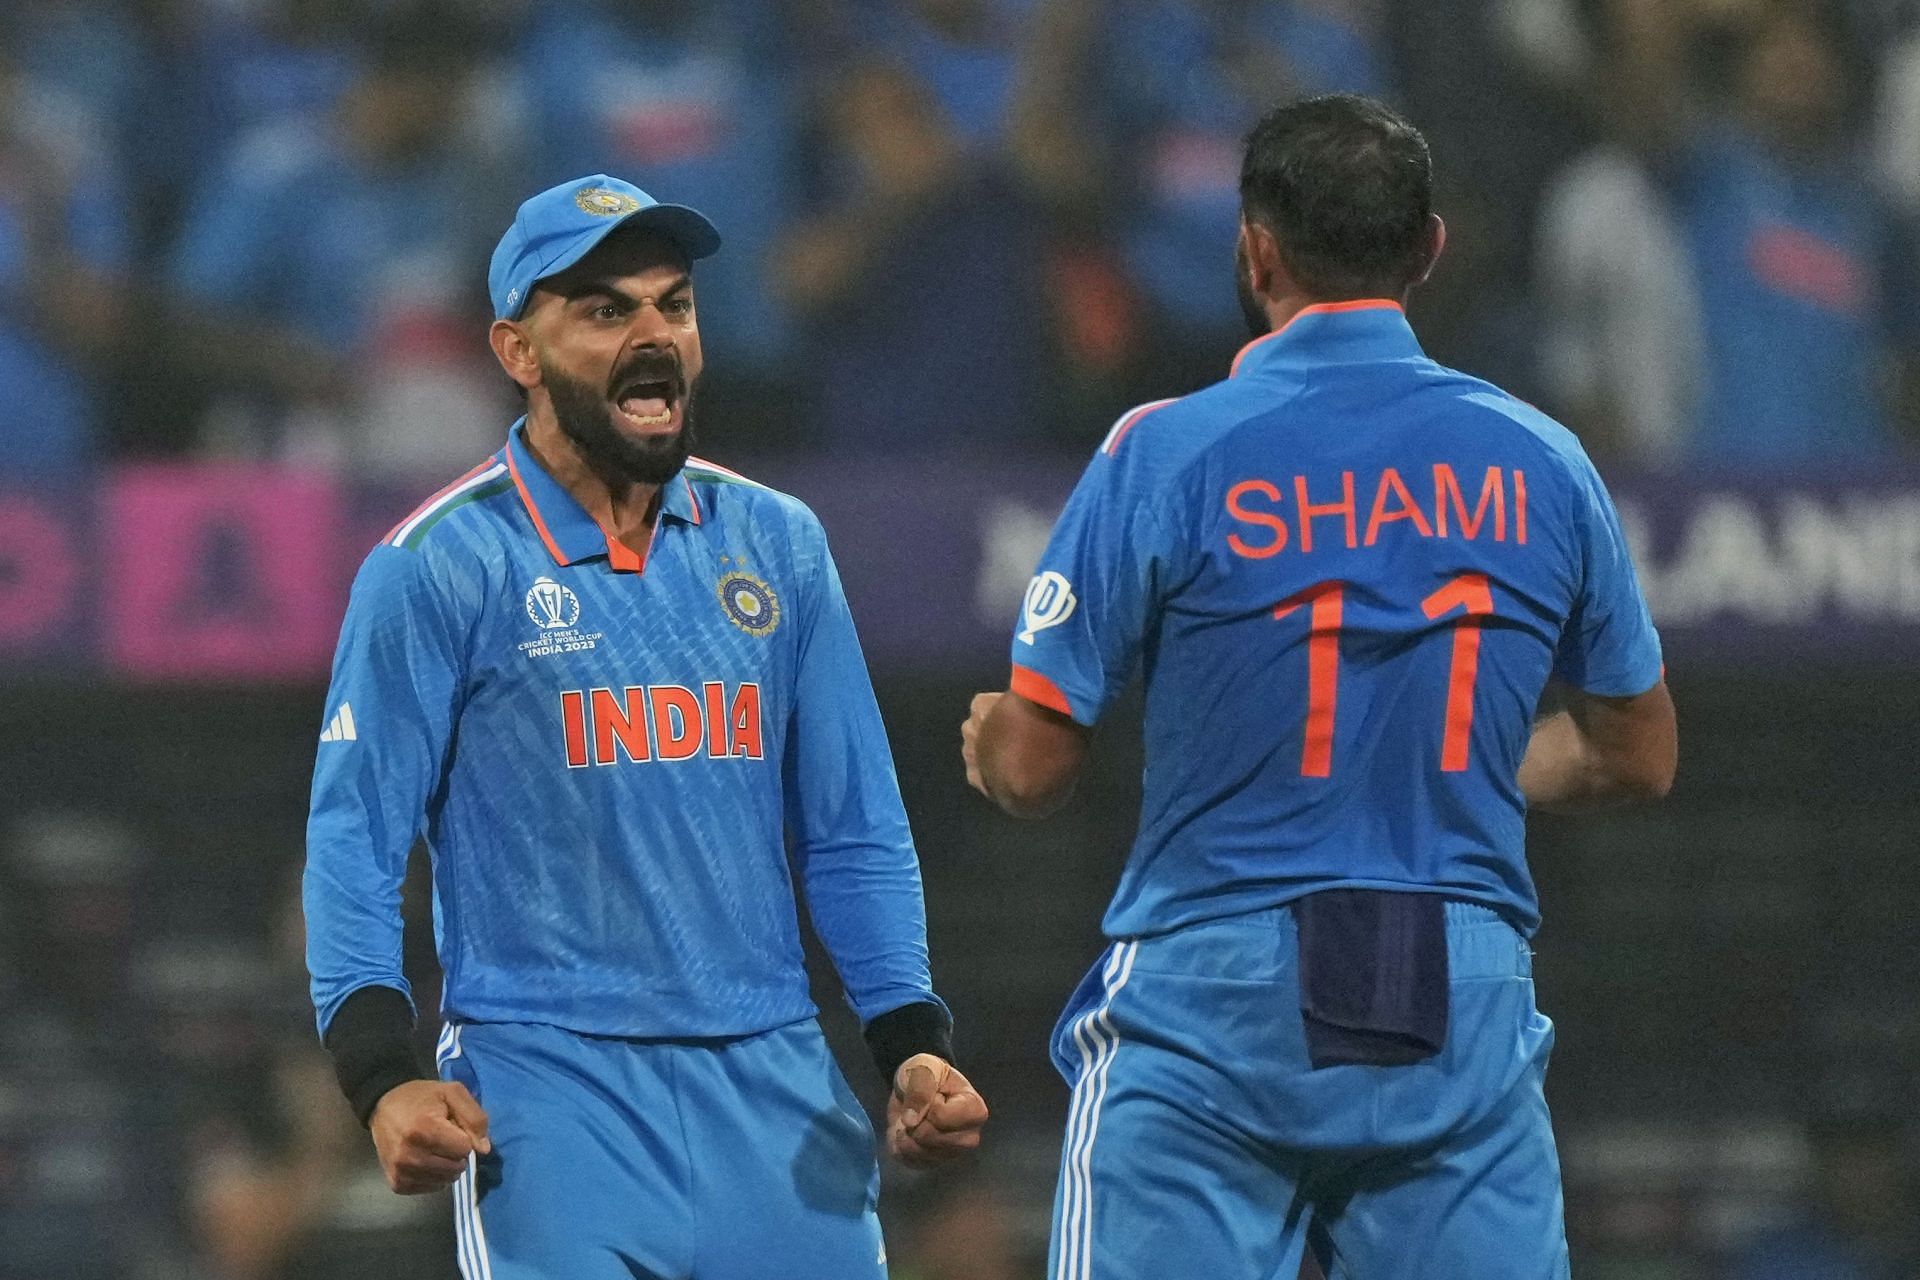 Mohammed Shami has tormented left-handers in the 2023 World Cup